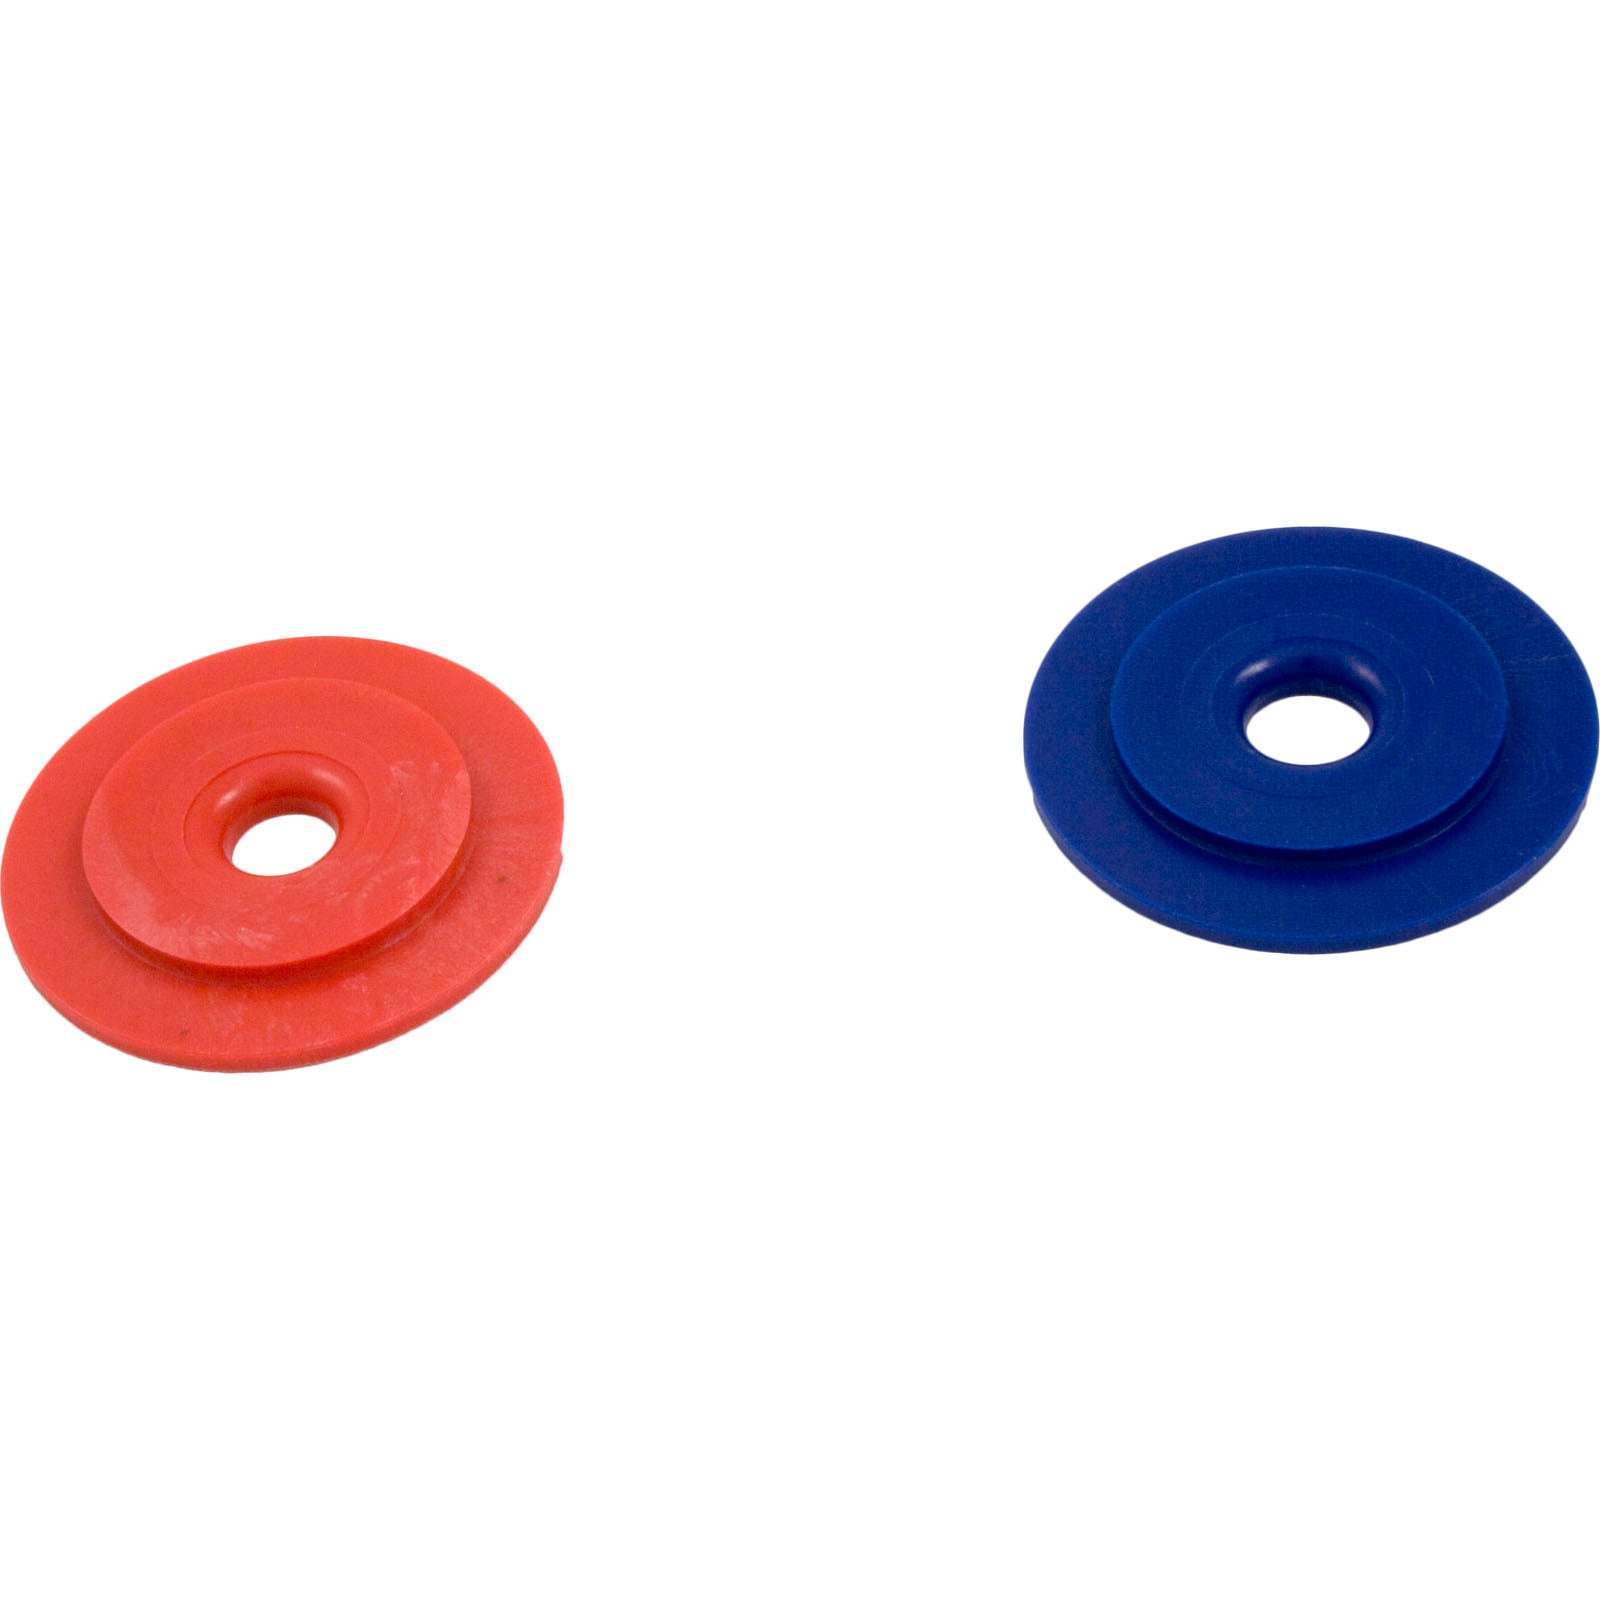 Zodiac Polaris 10-112-00 Red/Blue Wall Fitting Restrictor Disk